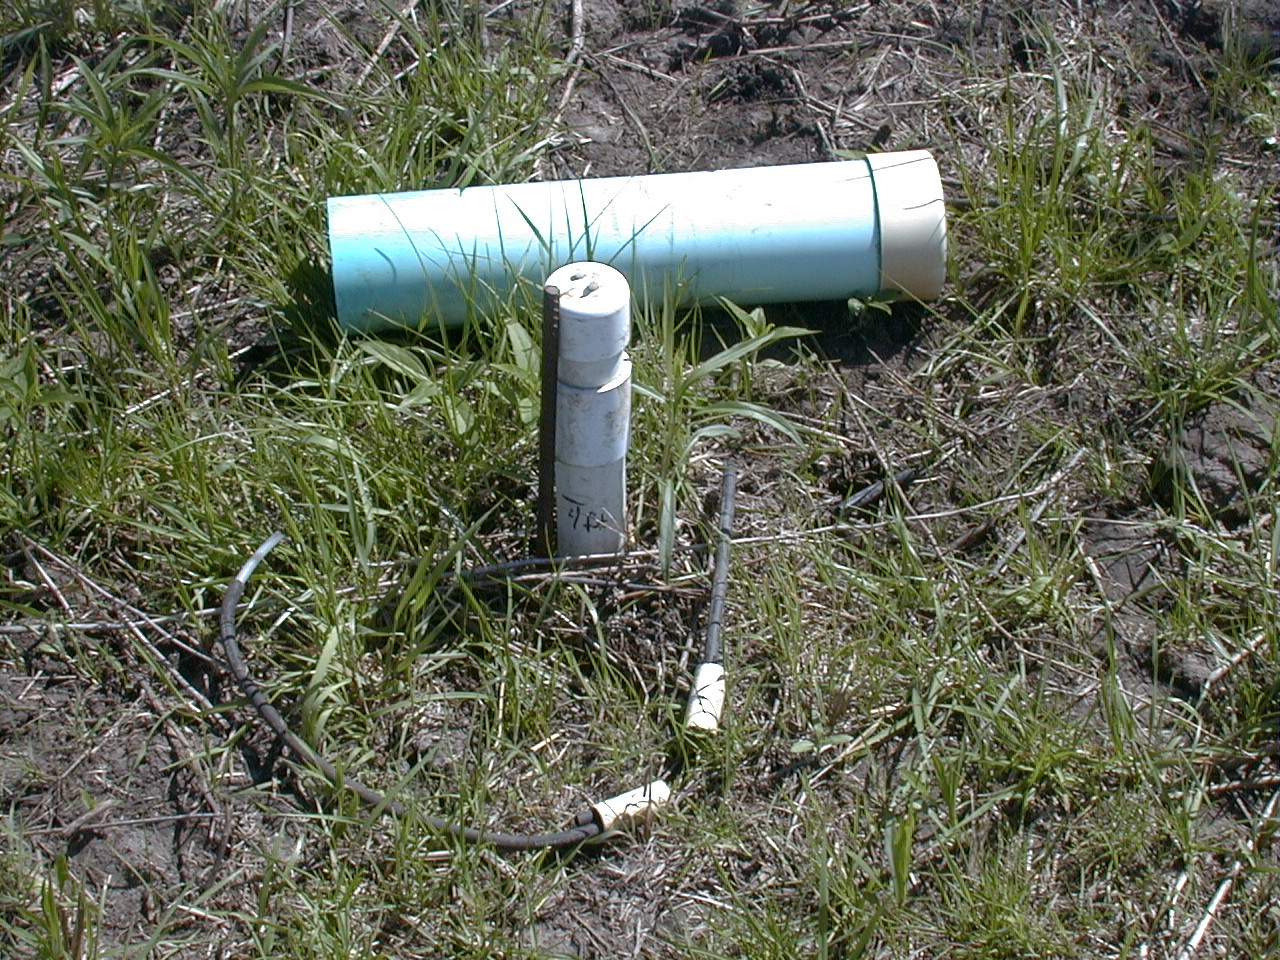 An eight-foot lysimeter is used to collect subsurface drainage (i.e. soil water).